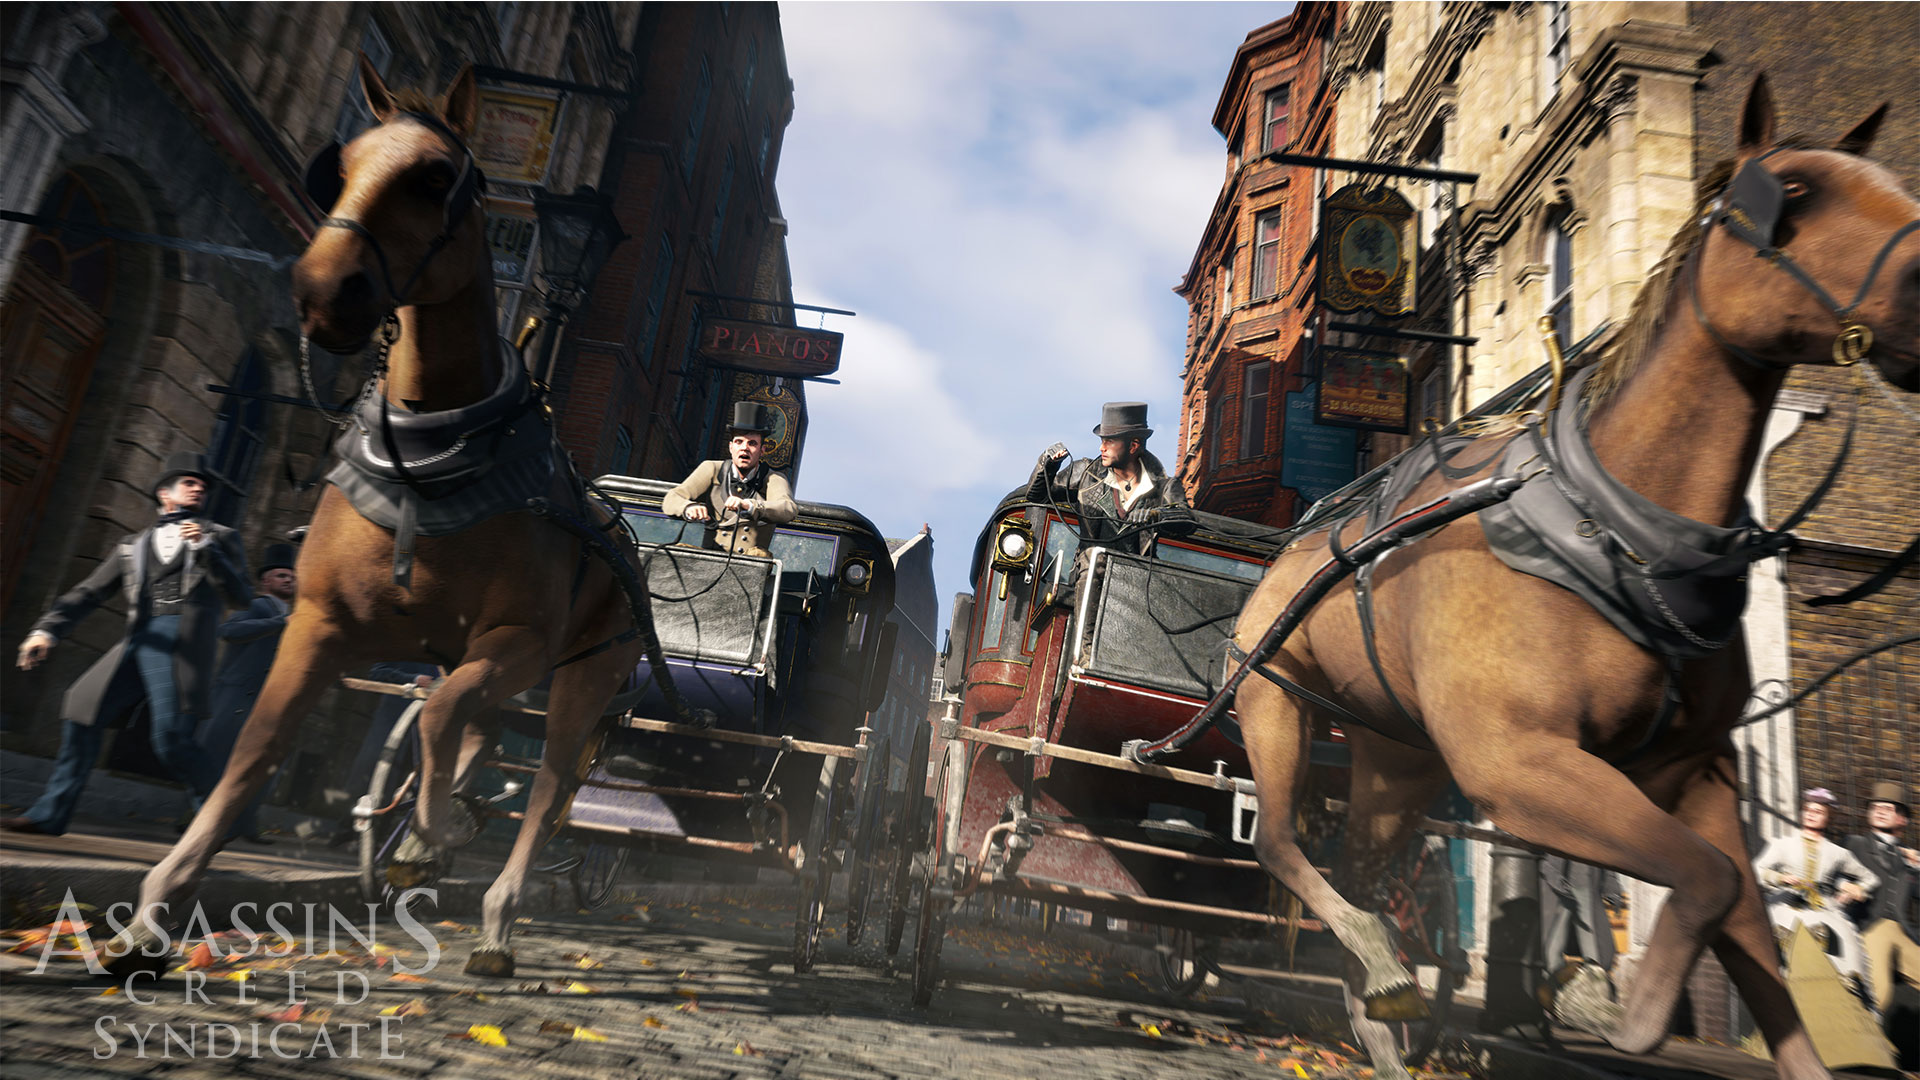 Robot - [CONSOLE] Thoughts of Assassins Creed: Syndicate? - RaGEZONE Forums